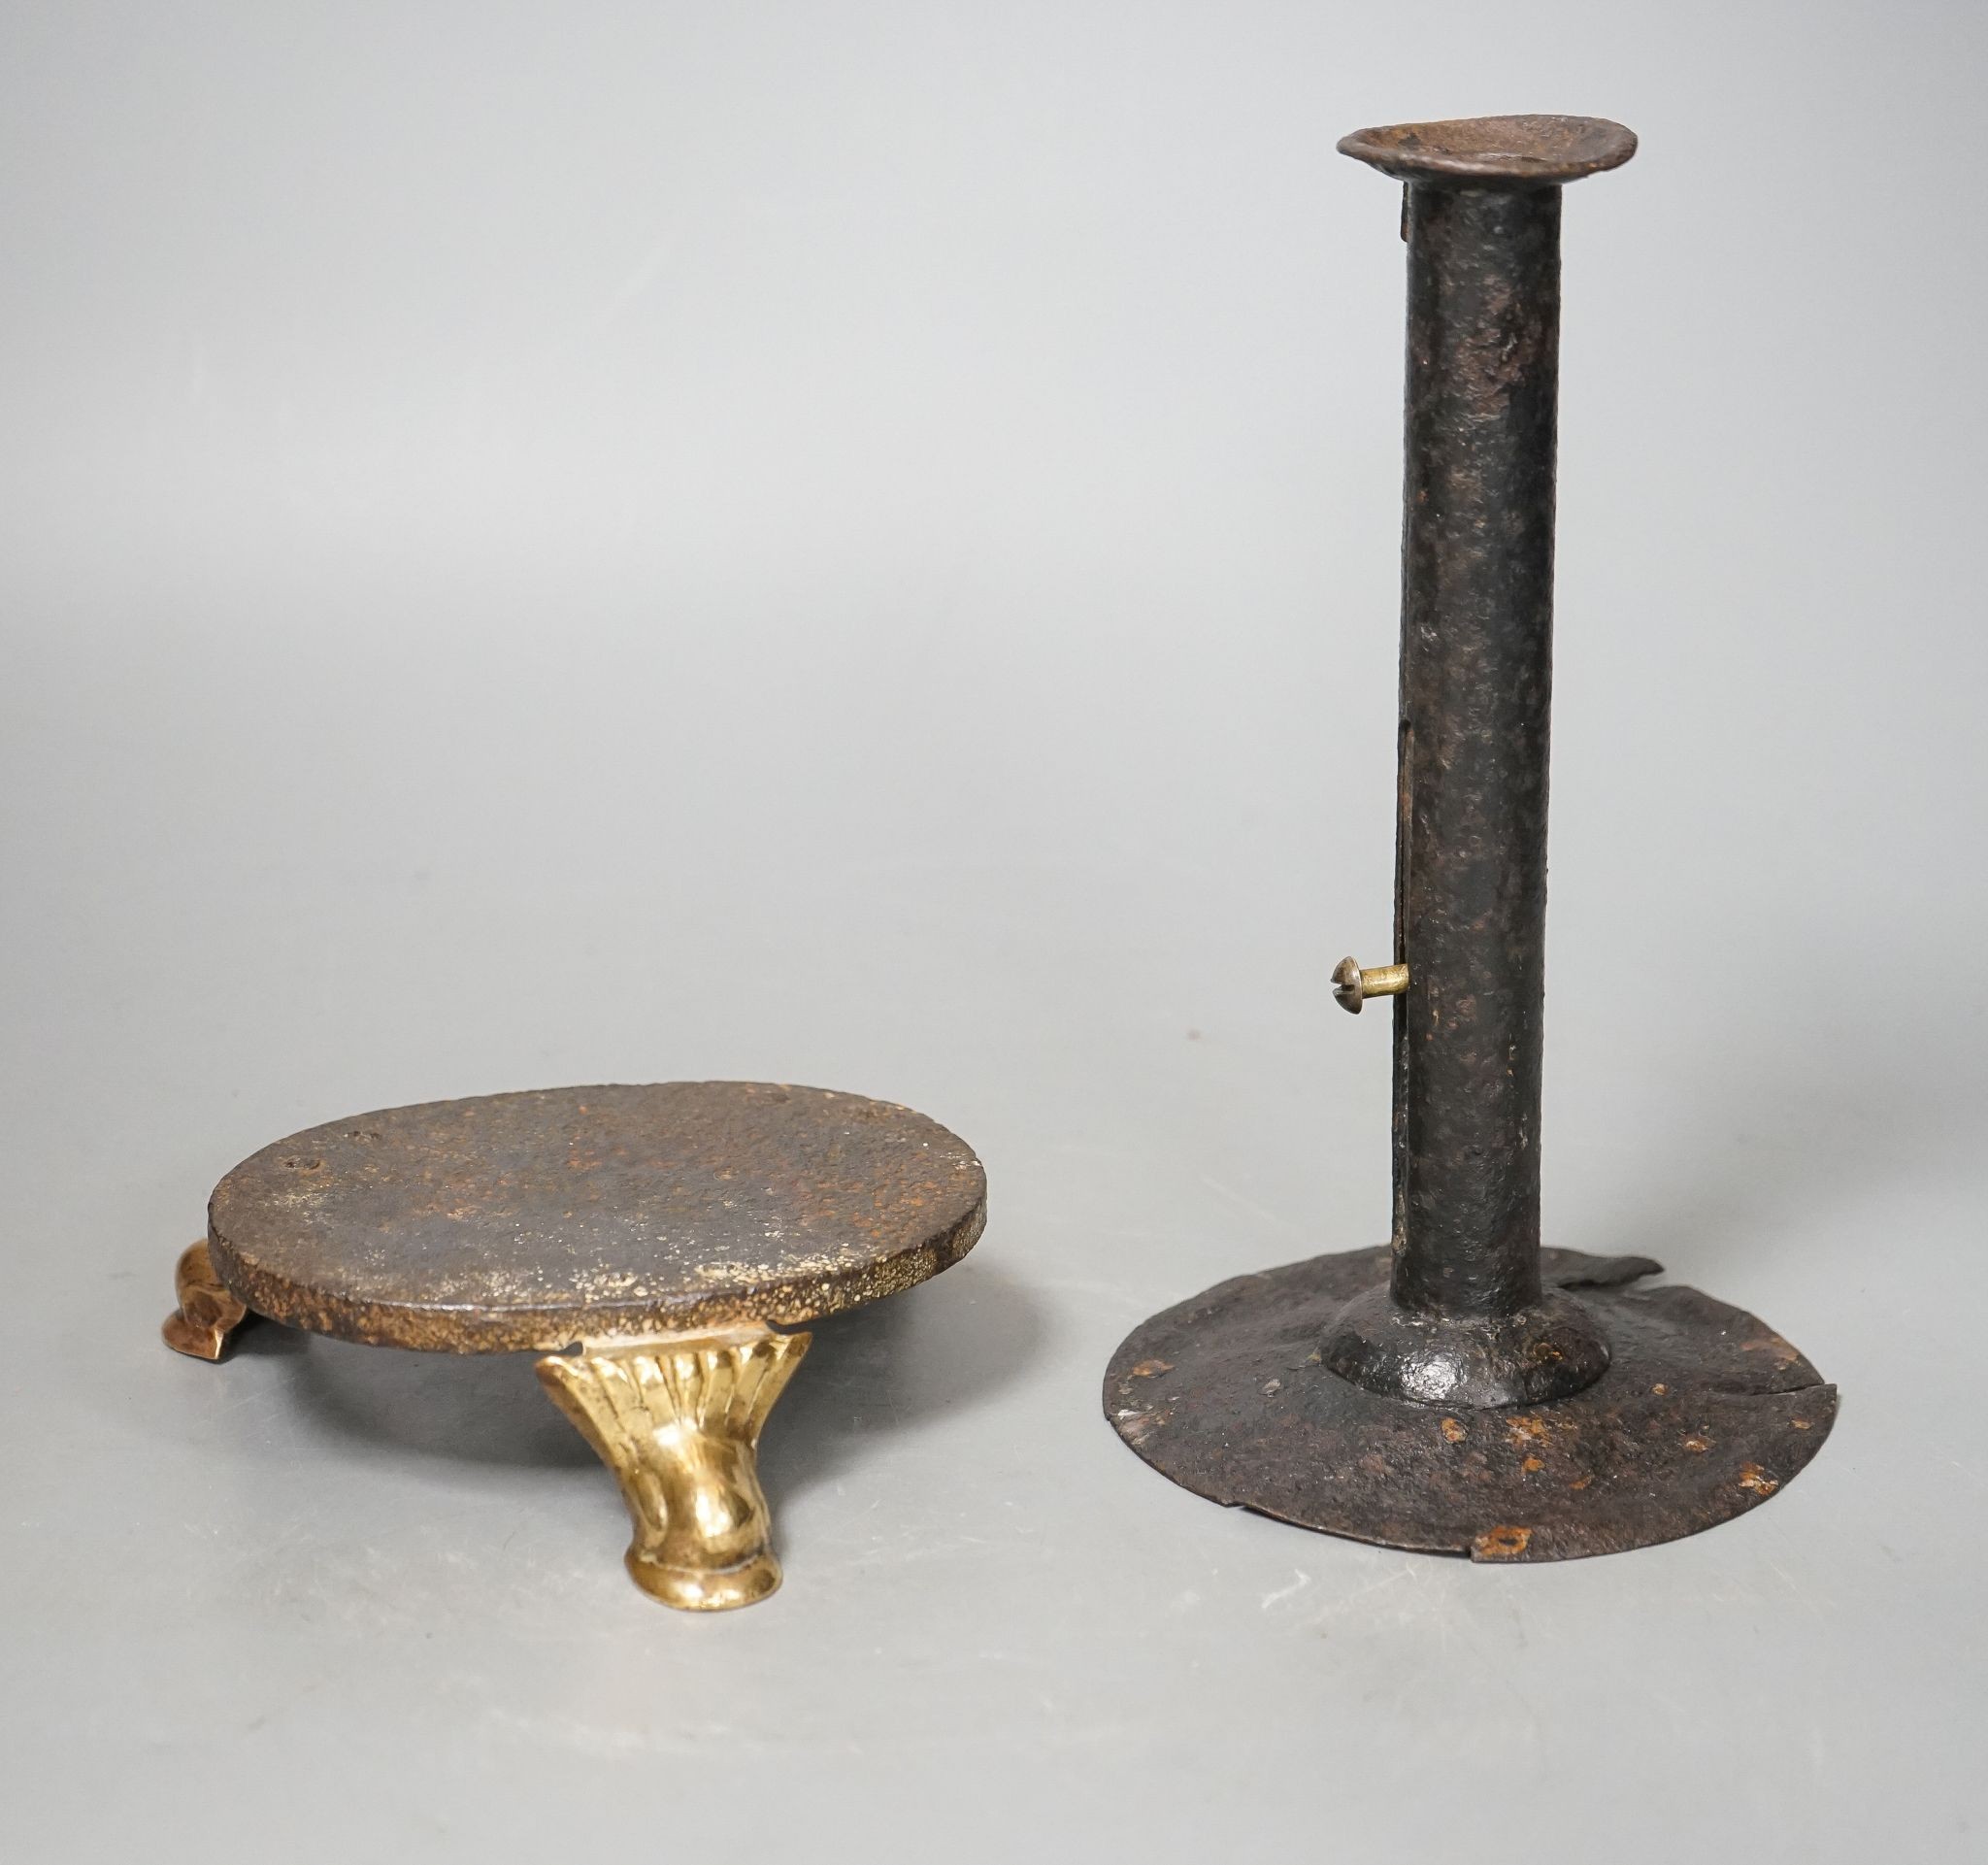 An 18th century provincial tole candlestick and an 18th century iron and brass oval stand, candlestick 20cm